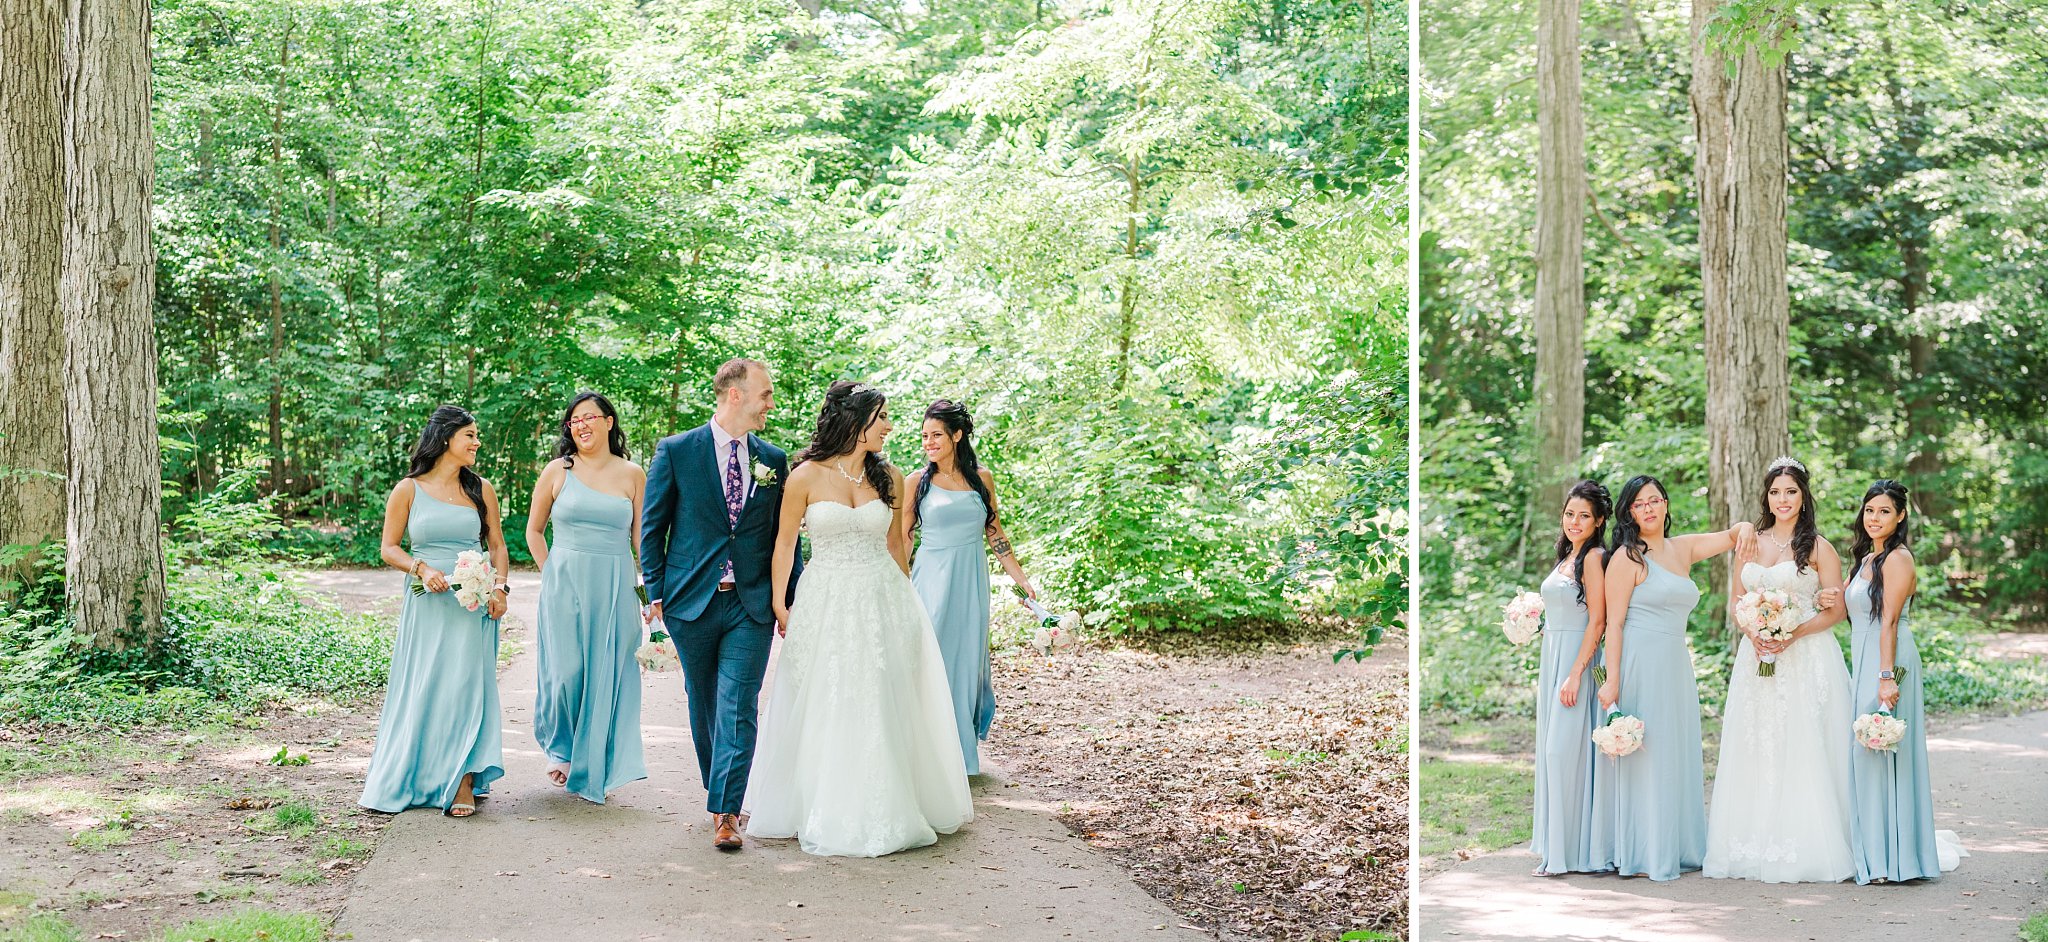 a wedding party laughs together as they walk down a path